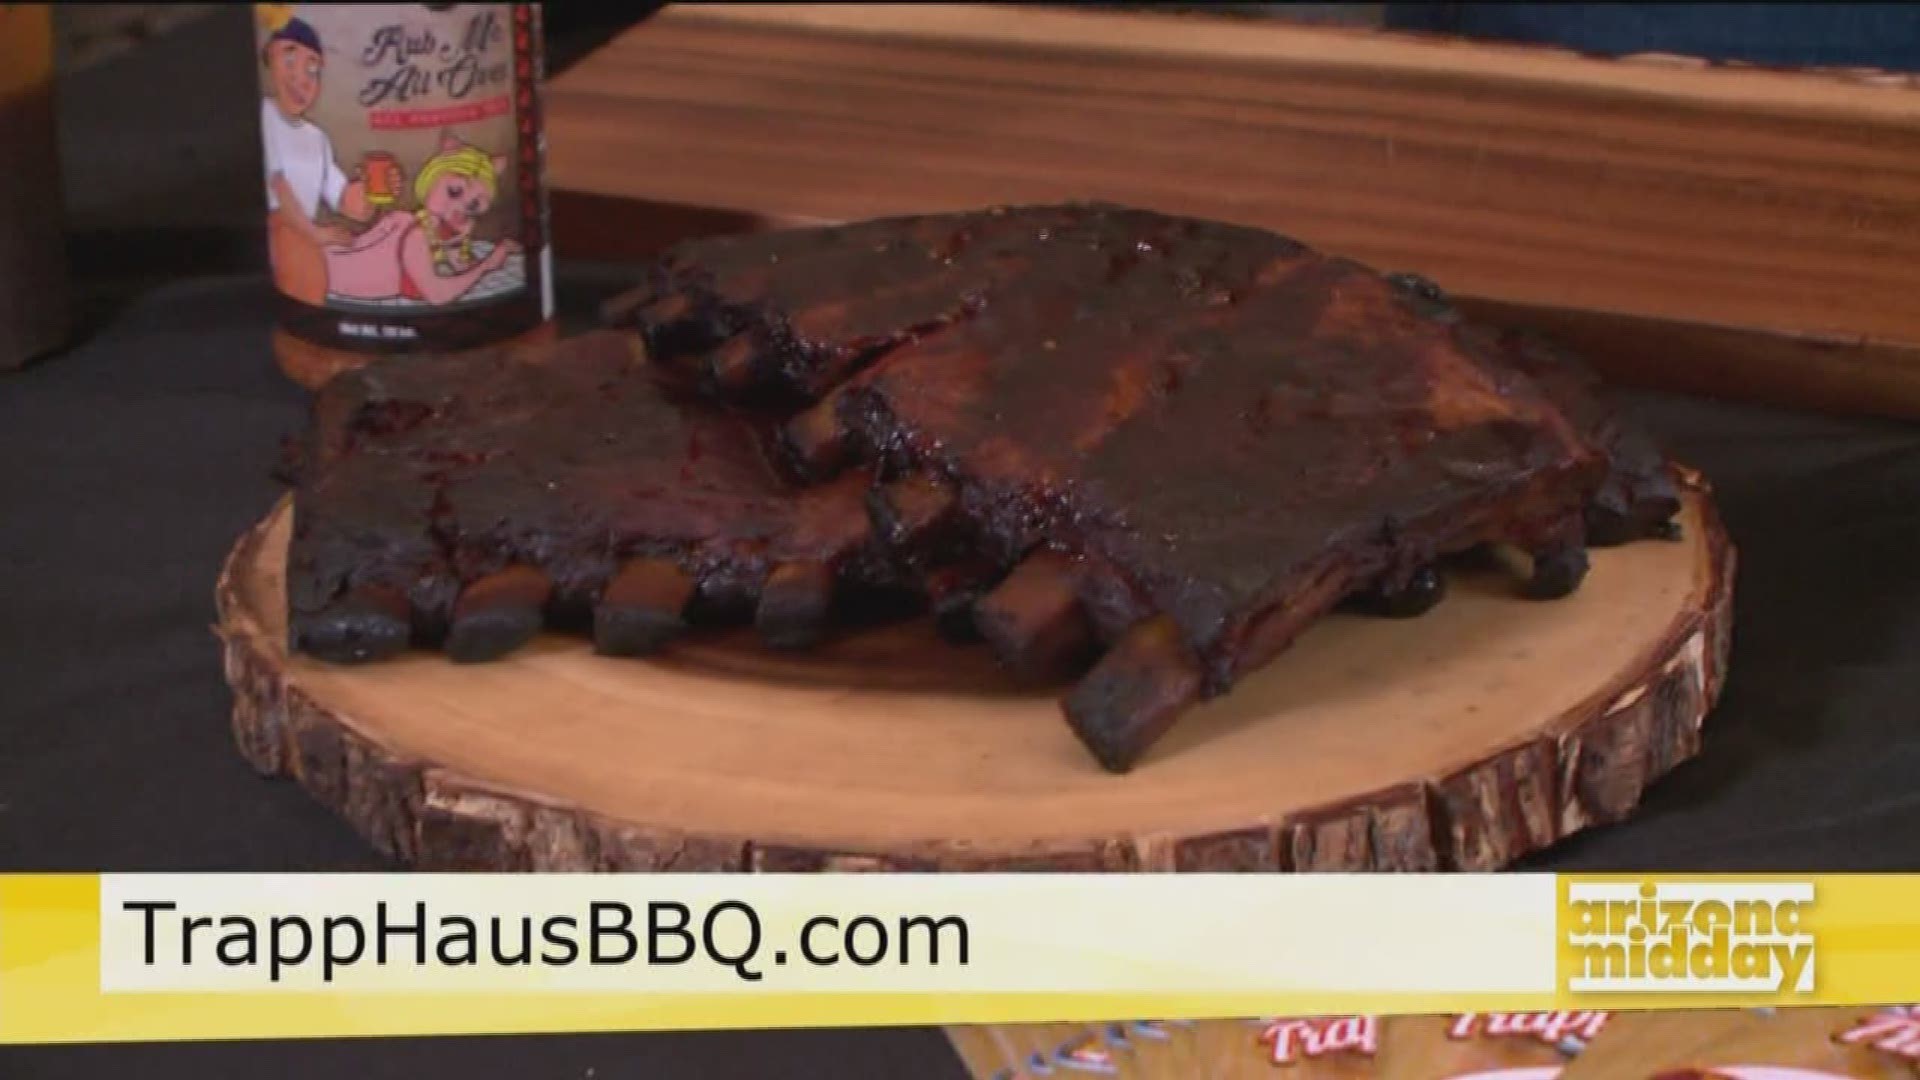 Phil the Grill Johnson from Trapp Haus BBQ is showing us how to make the perfect ribs, brisket and sausage